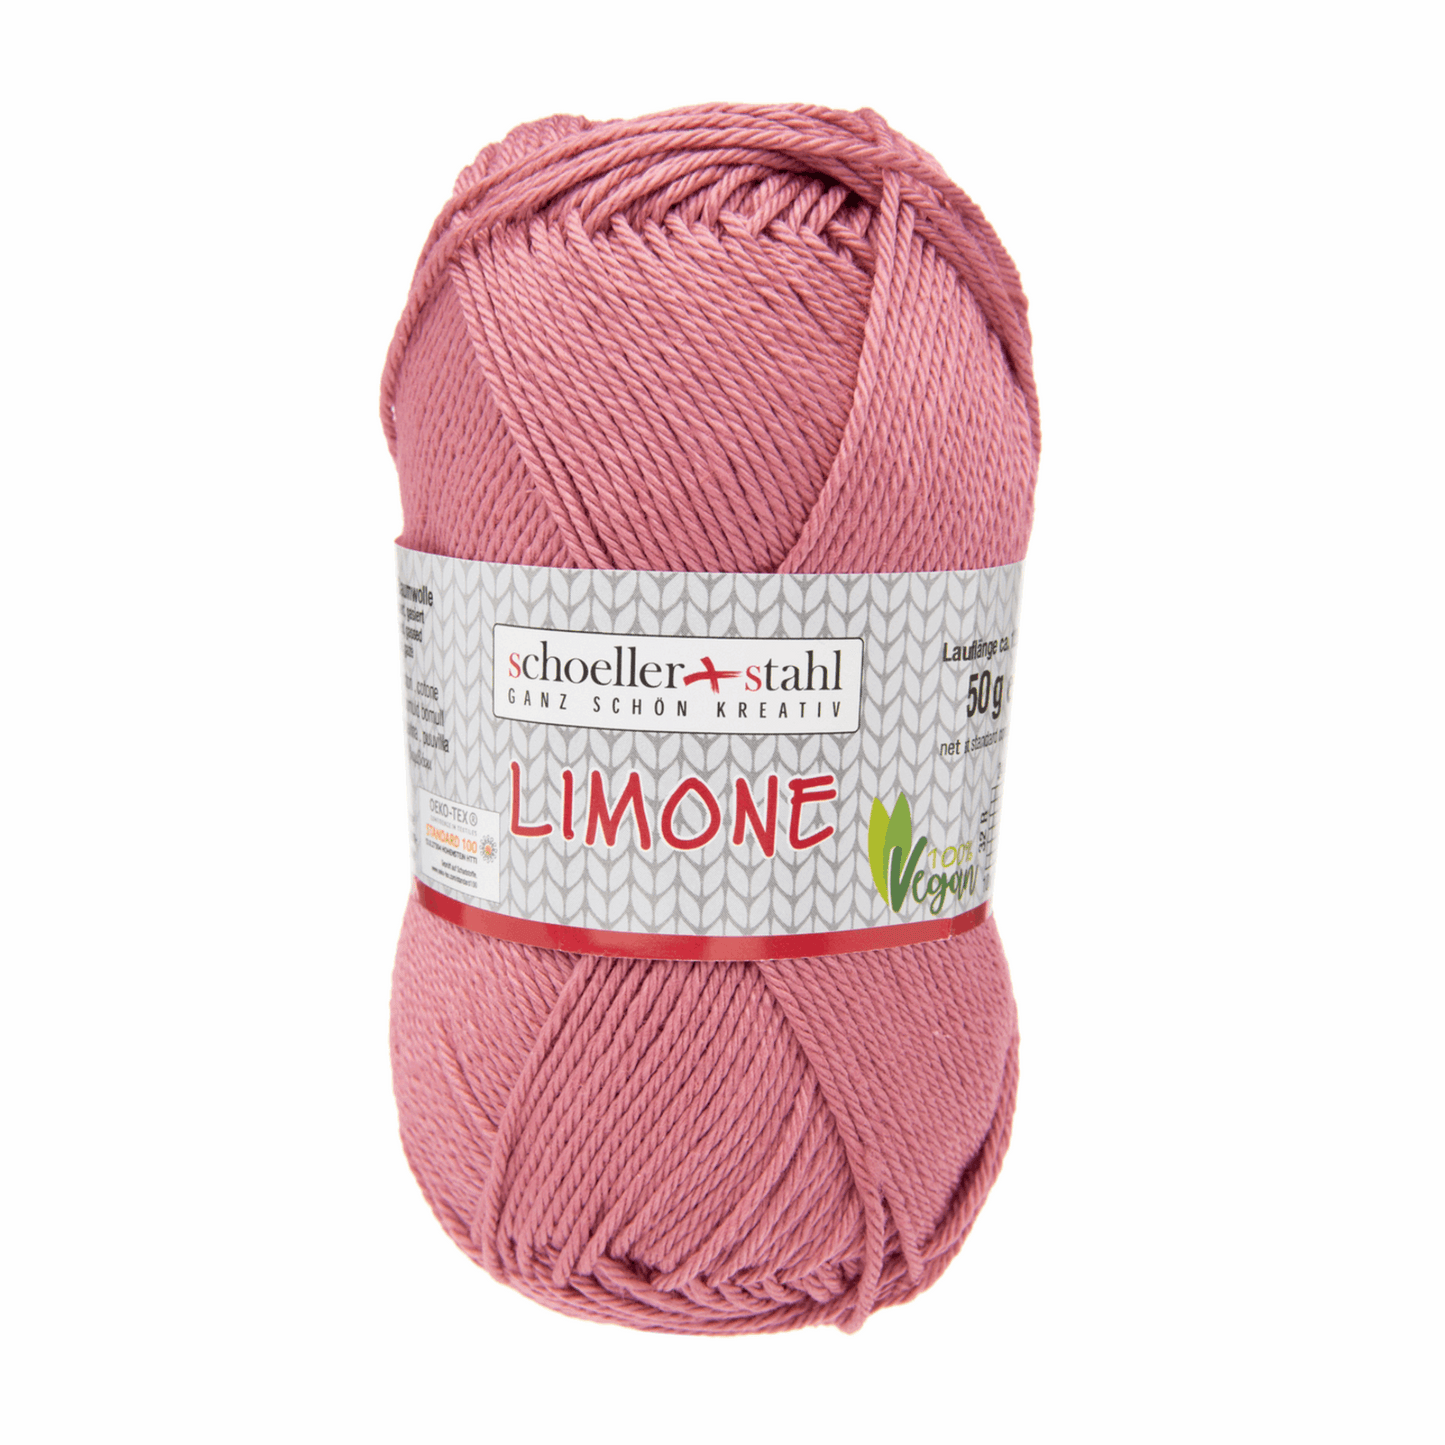 Limone 50g, 90130, Farbe 172, rouge